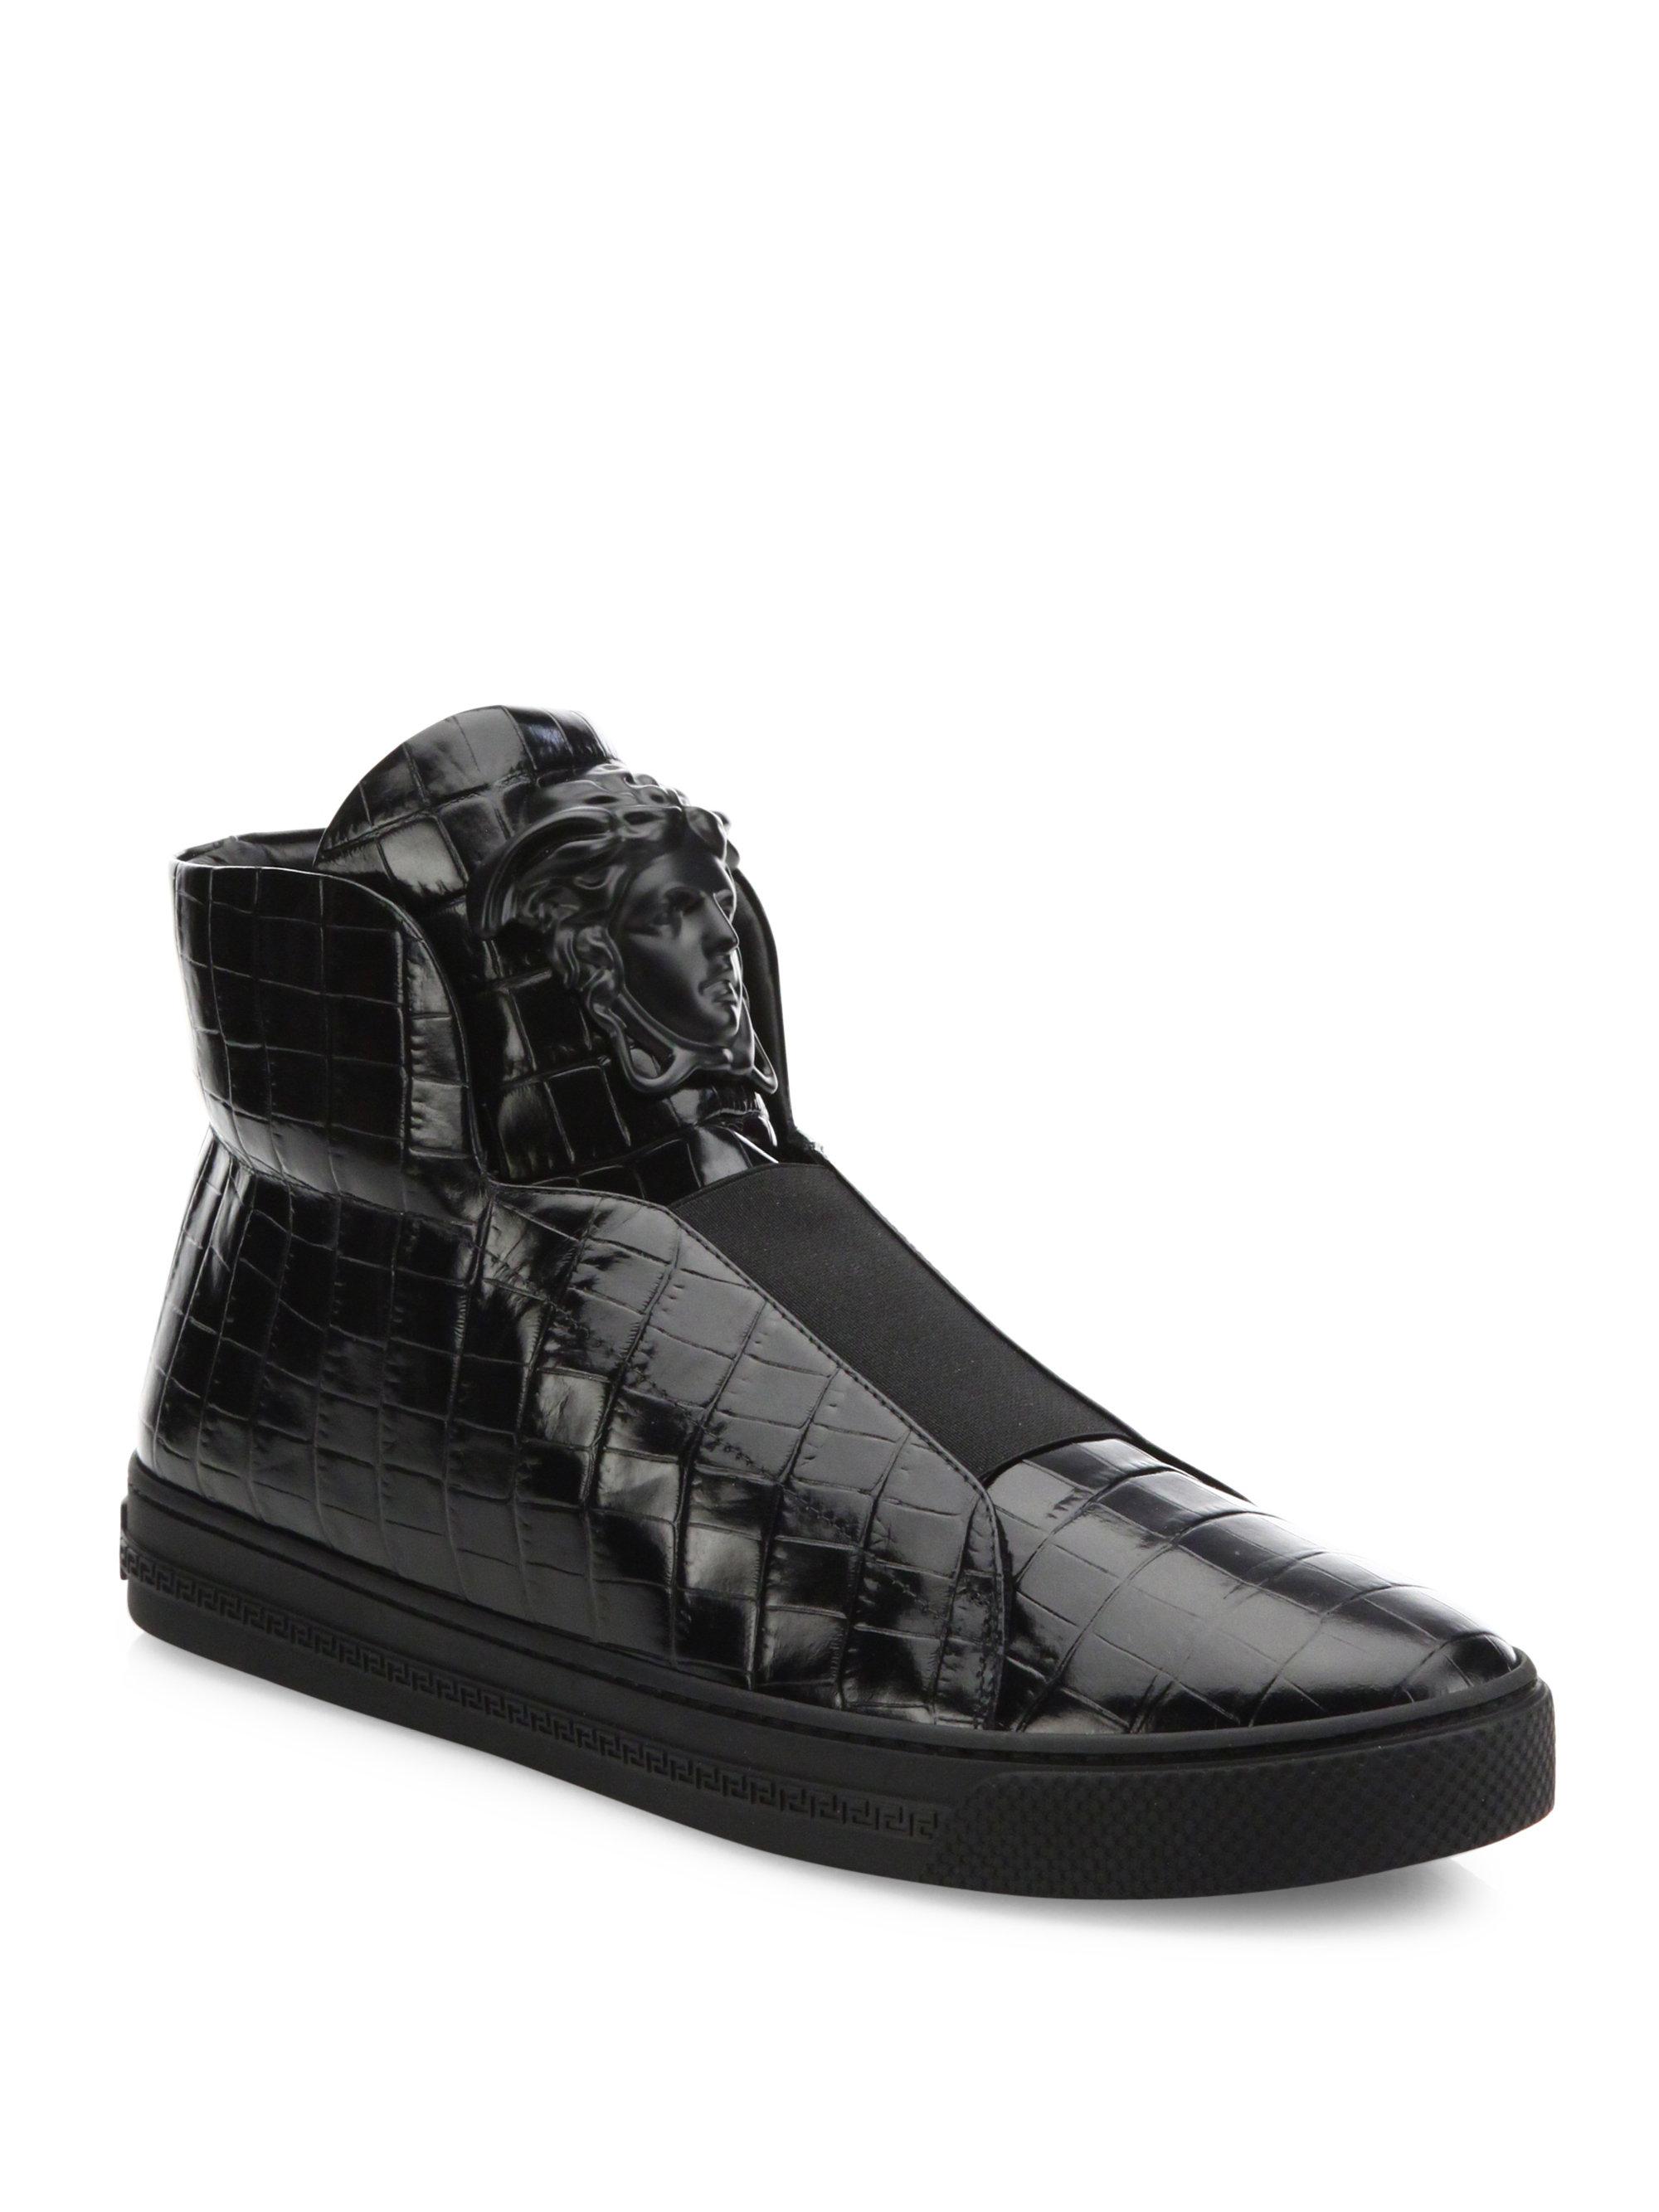 Versace Palazzo Idol Medusa Leather Sneakers in Black for Men | Lyst